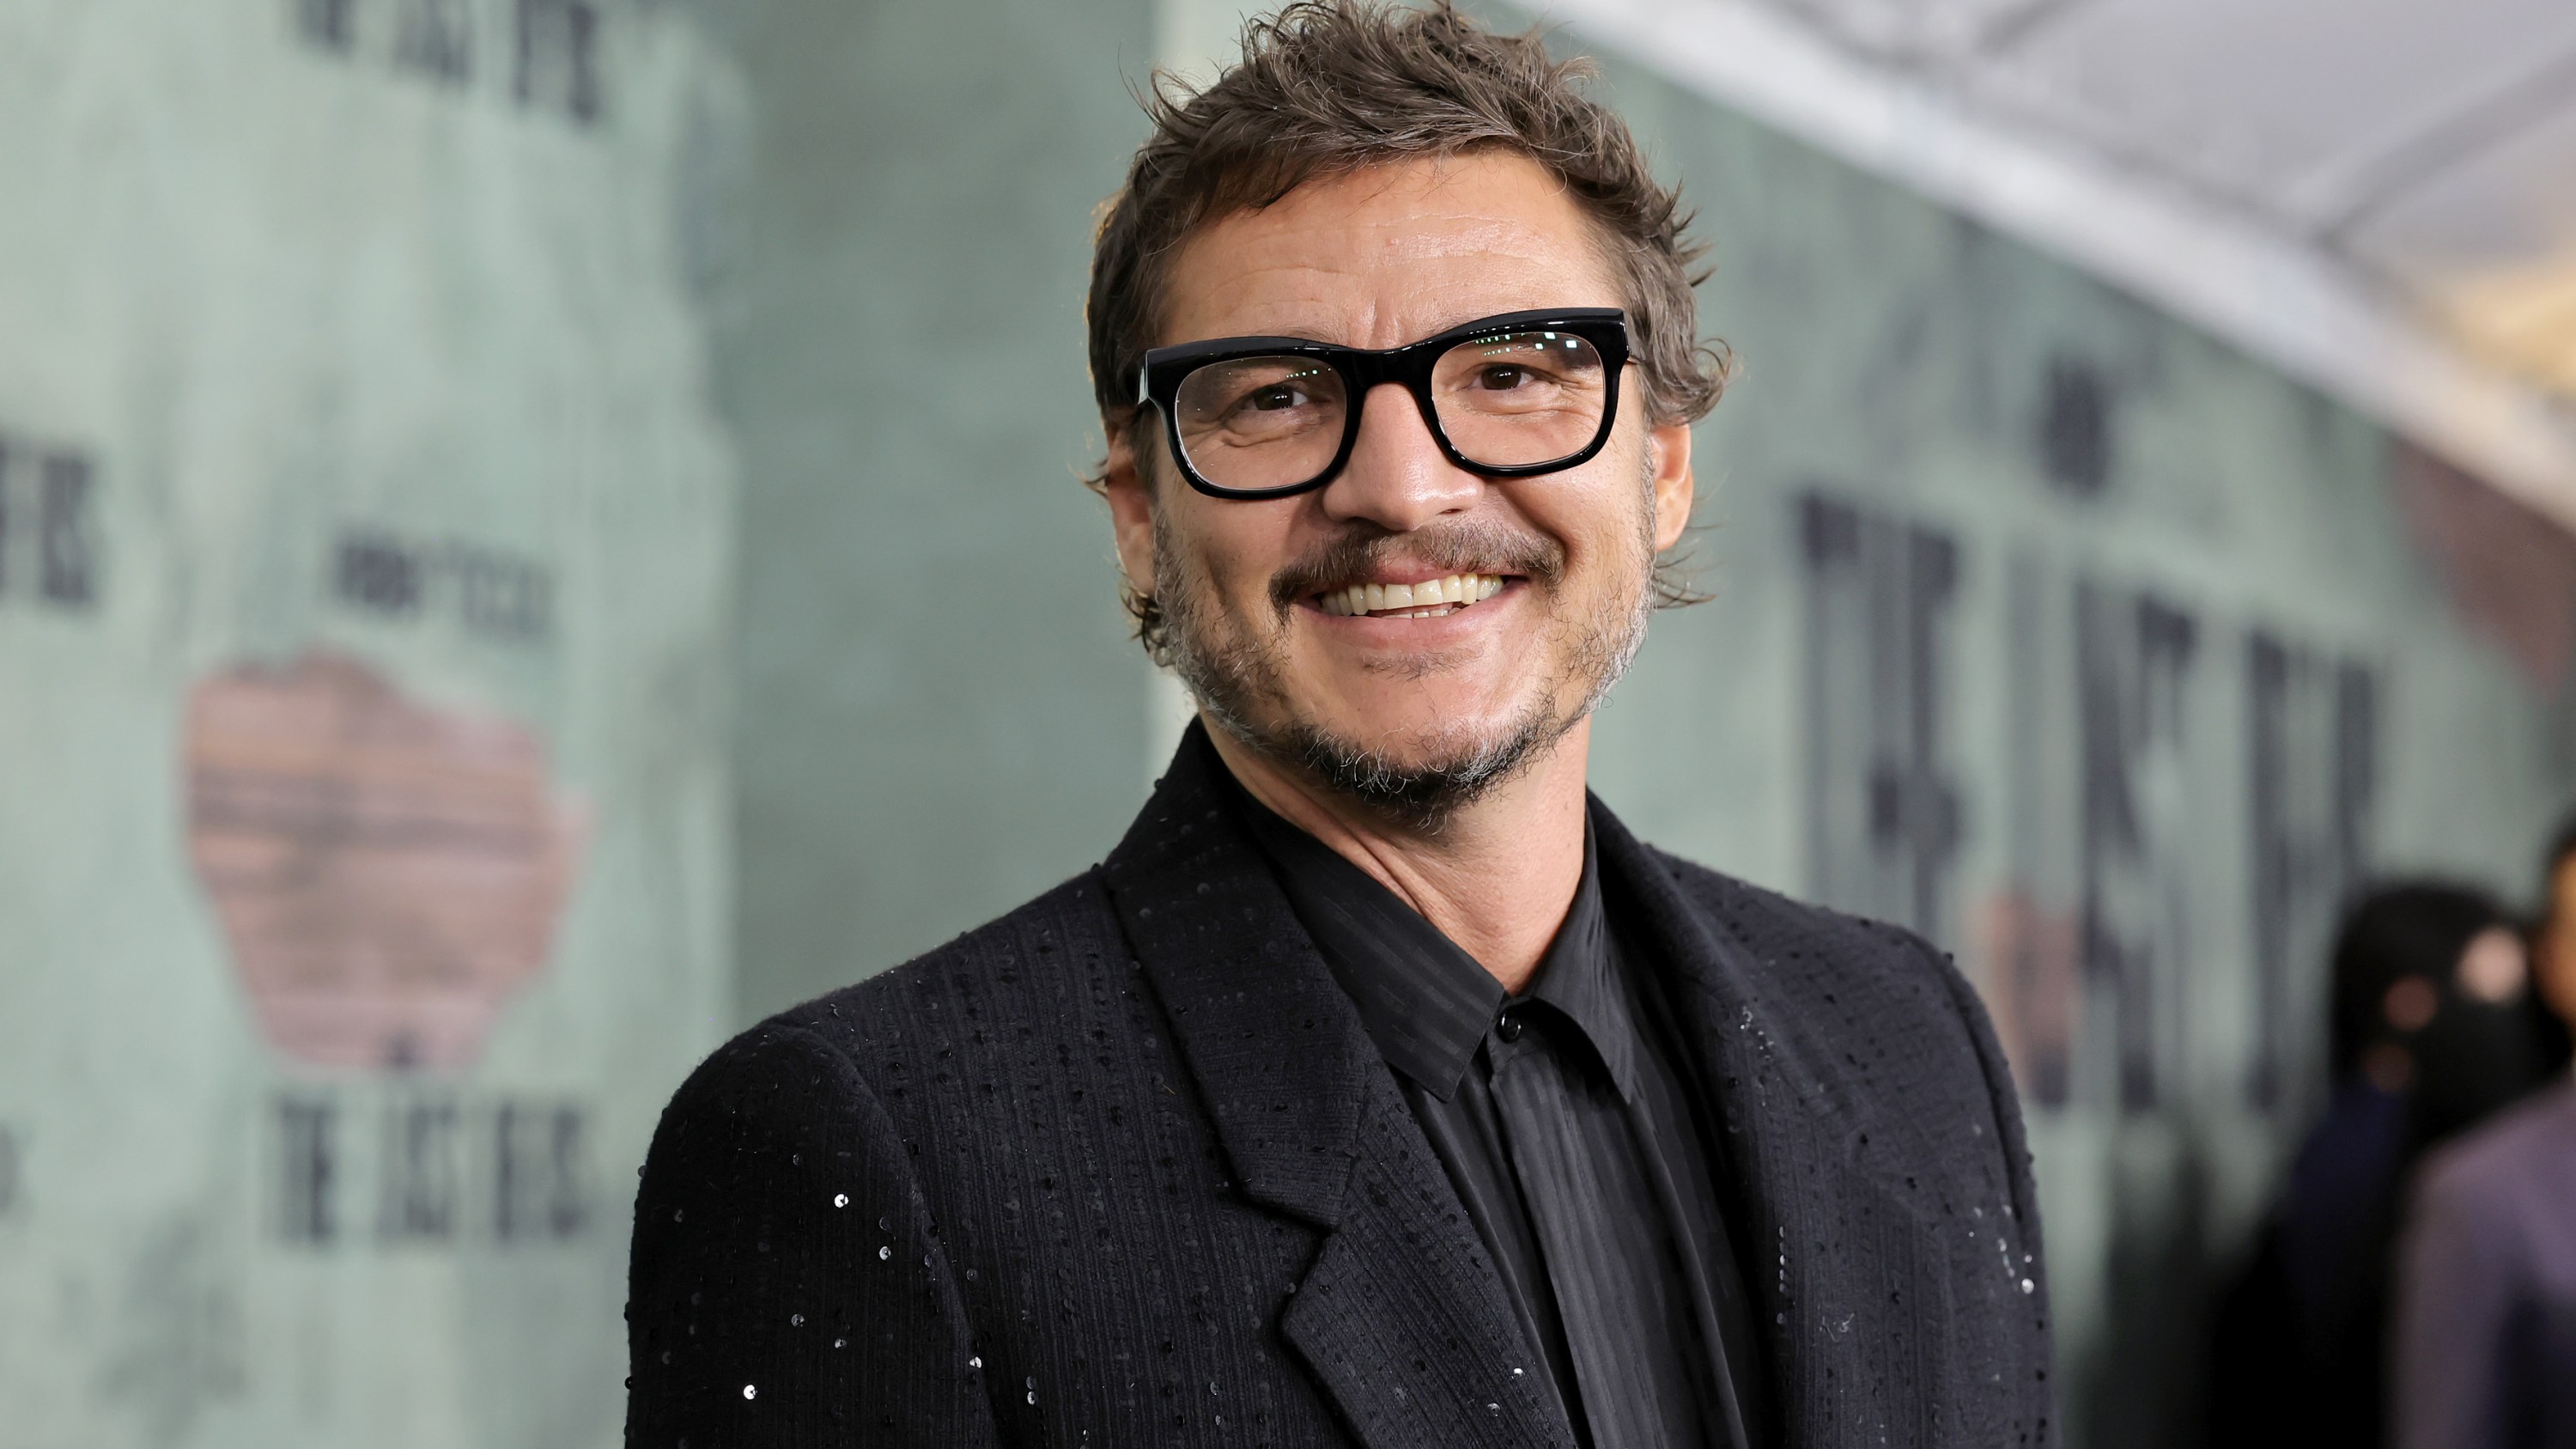 Pedro Pascal at "The Last of Us" premiere